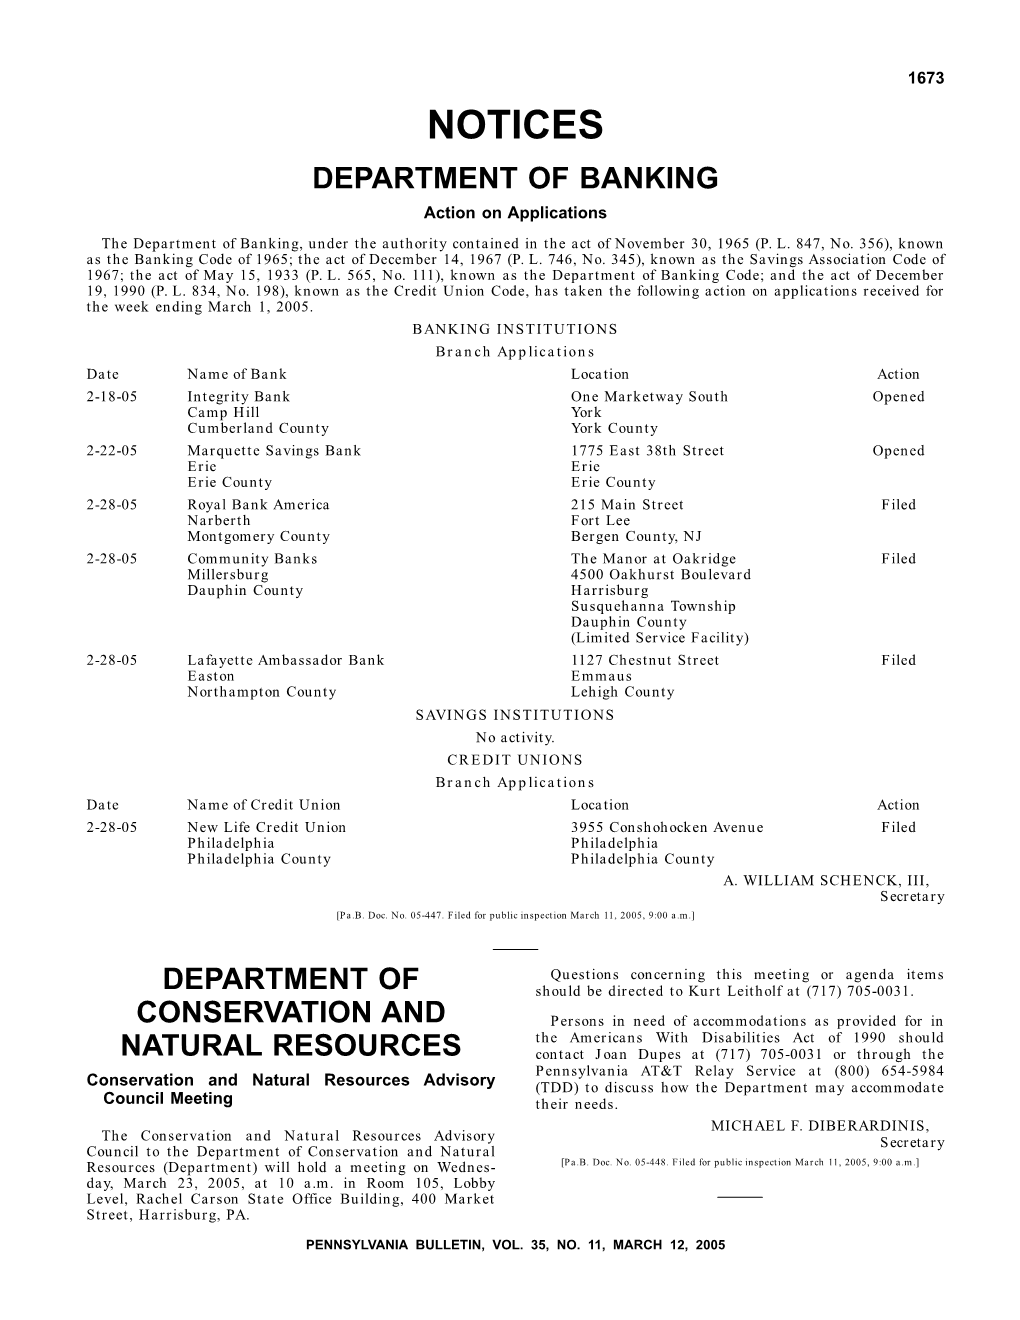 NOTICES DEPARTMENT of BANKING Action on Applications the Department of Banking, Under the Authority Contained in the Act of November 30, 1965 (P